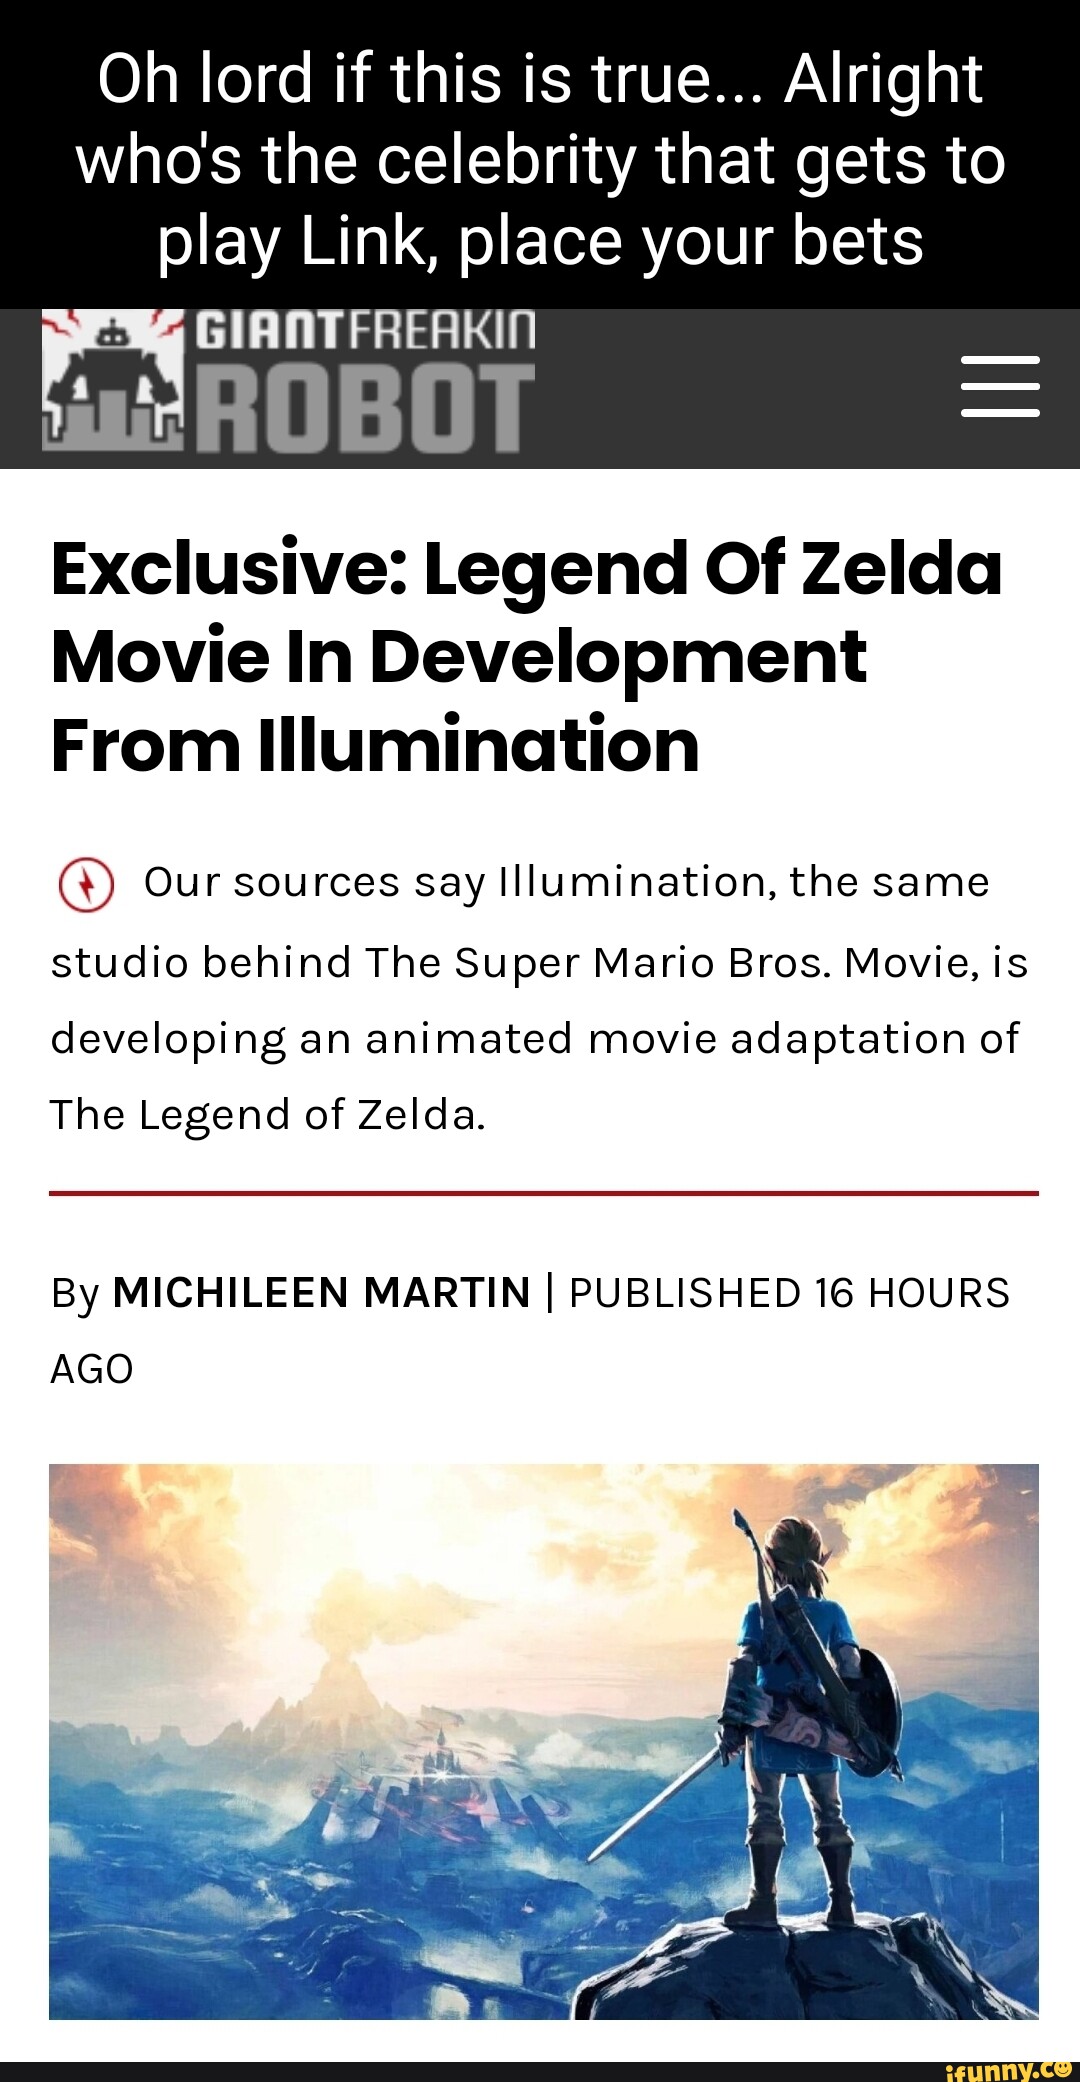 Oh lord if this is true... Alright who's the celebrity that gets to play  Link, place